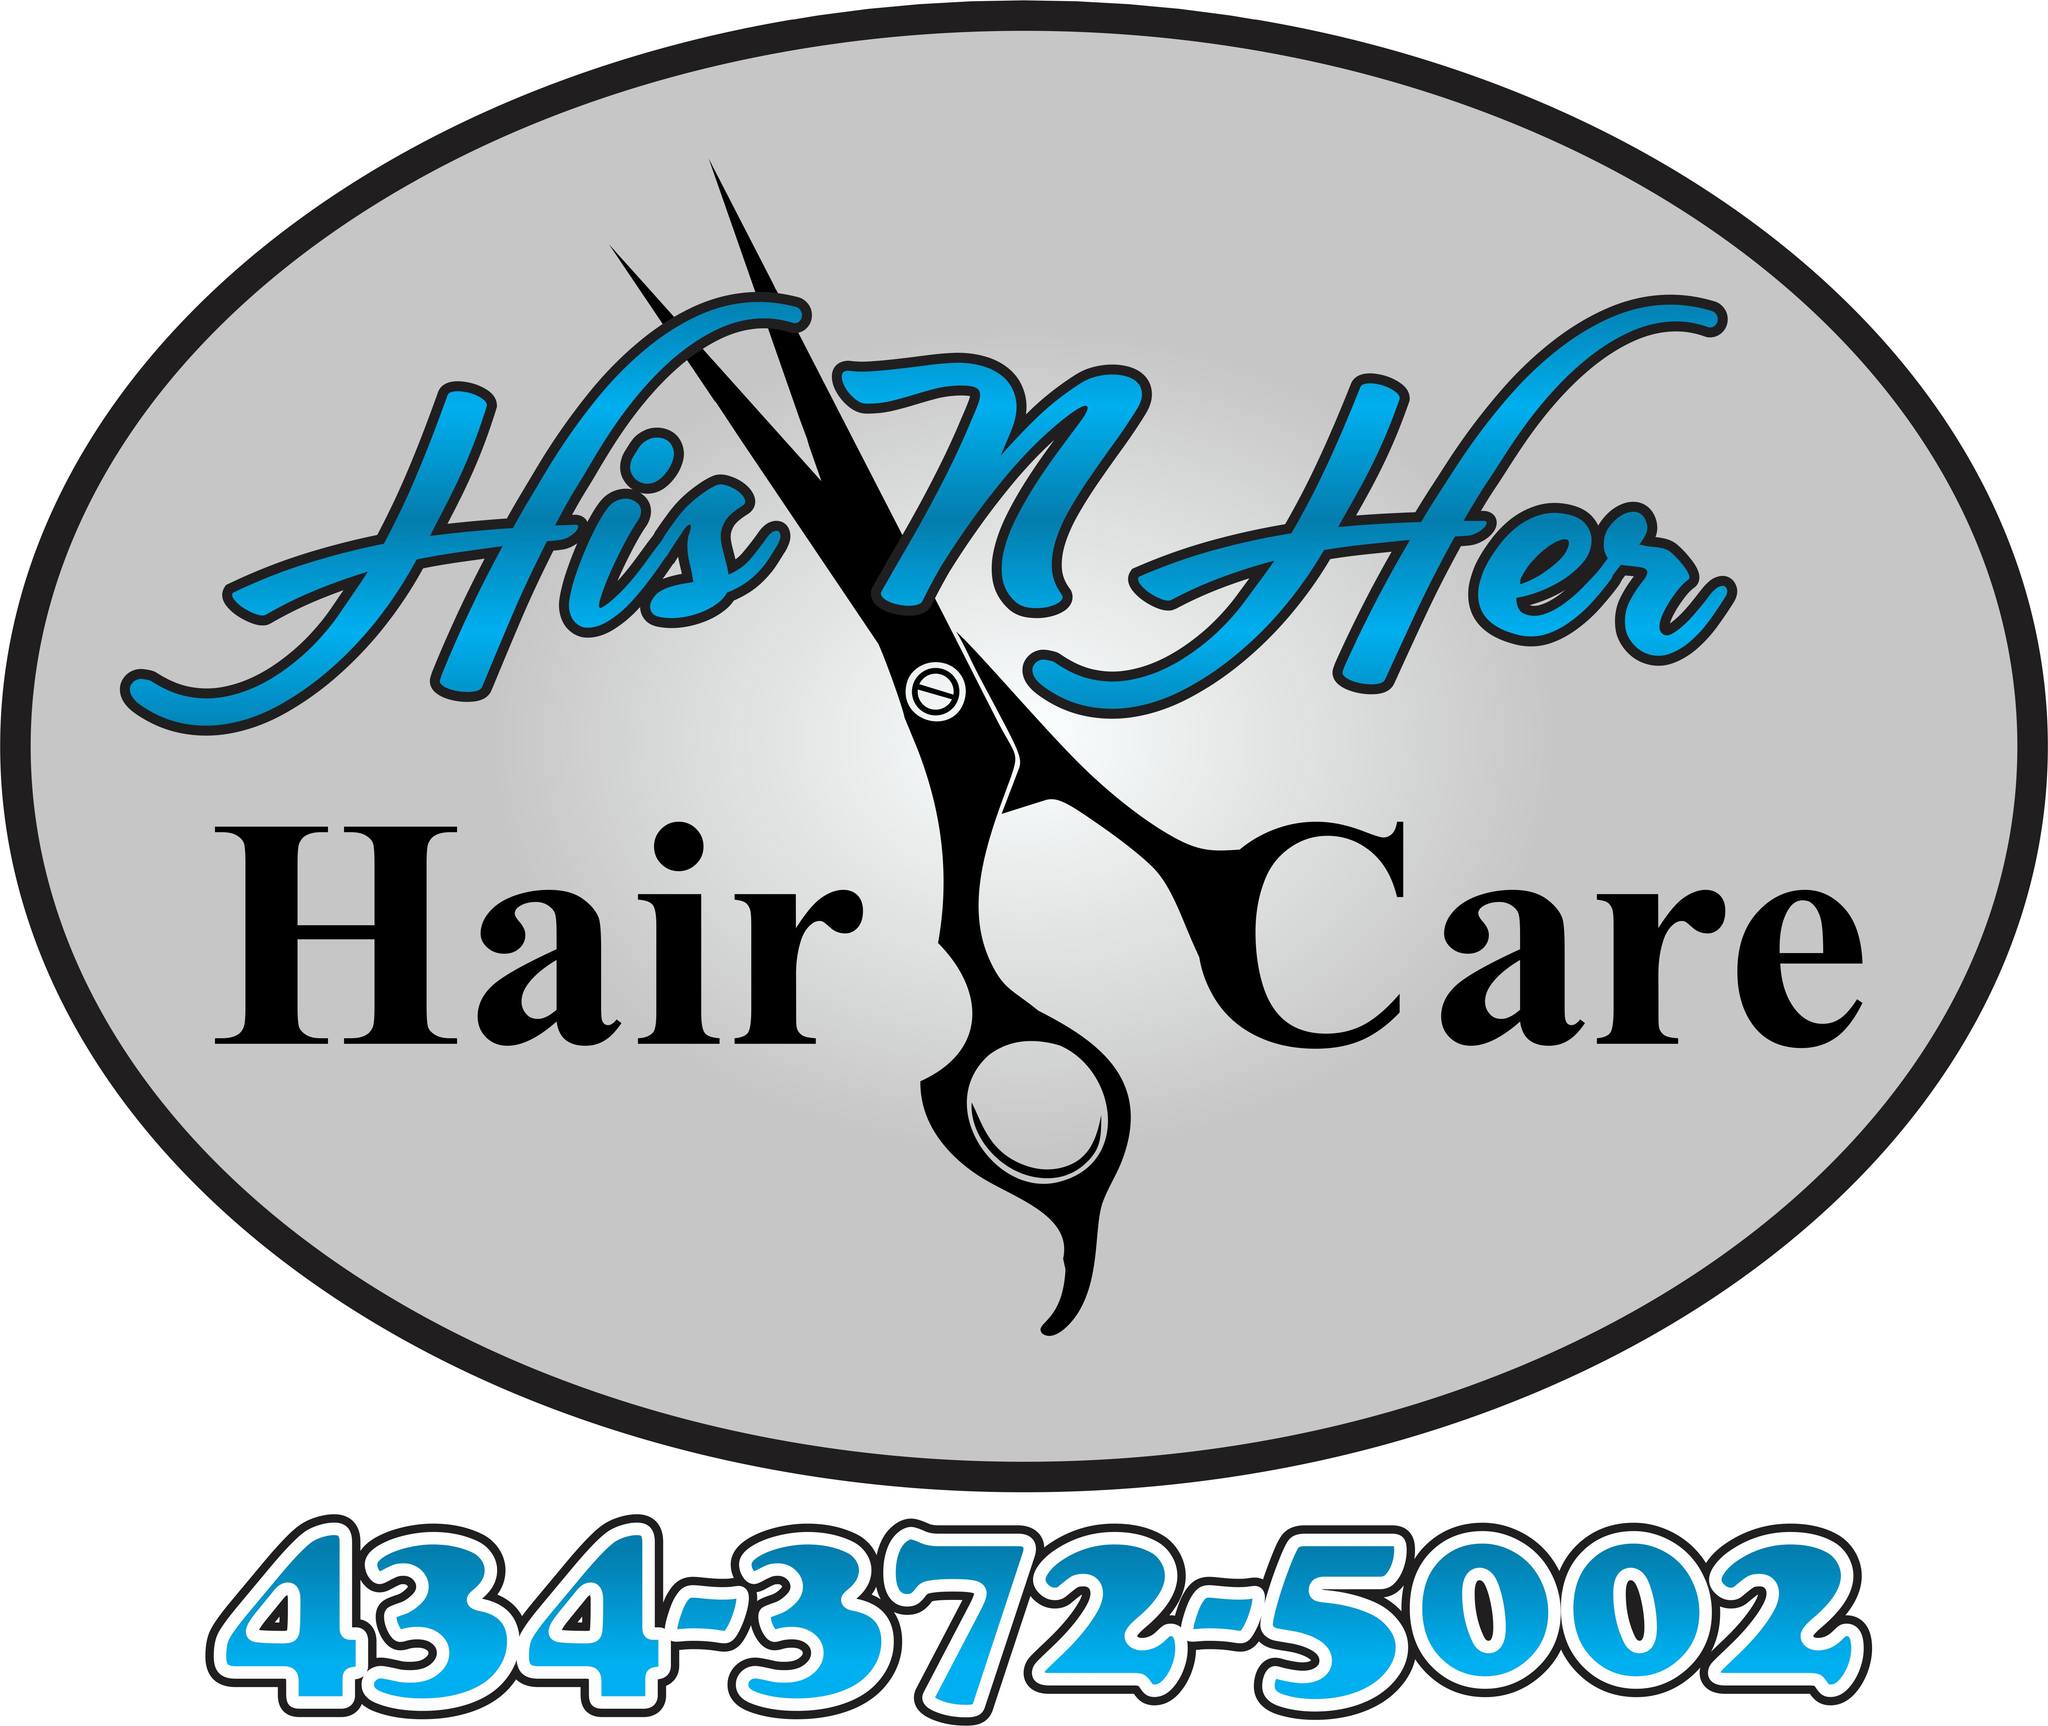 His & Her Hair Care 425 Boyd St, Chase City Virginia 23924